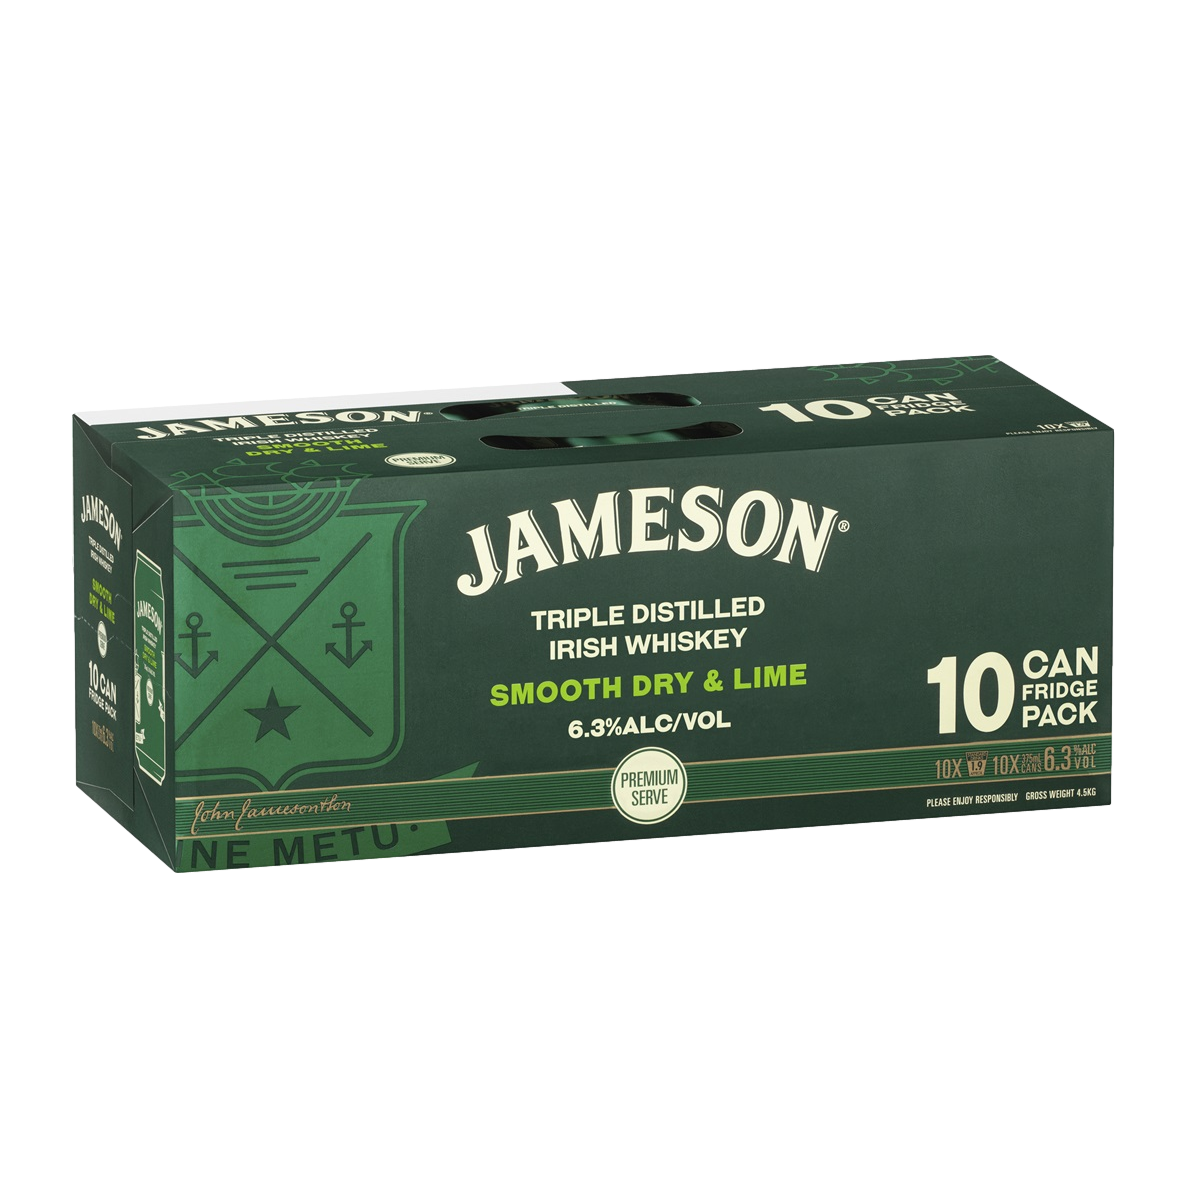 Jameson Smooth Dry & Lime Premium Serve 6.3% 375ml Can 10 Pack